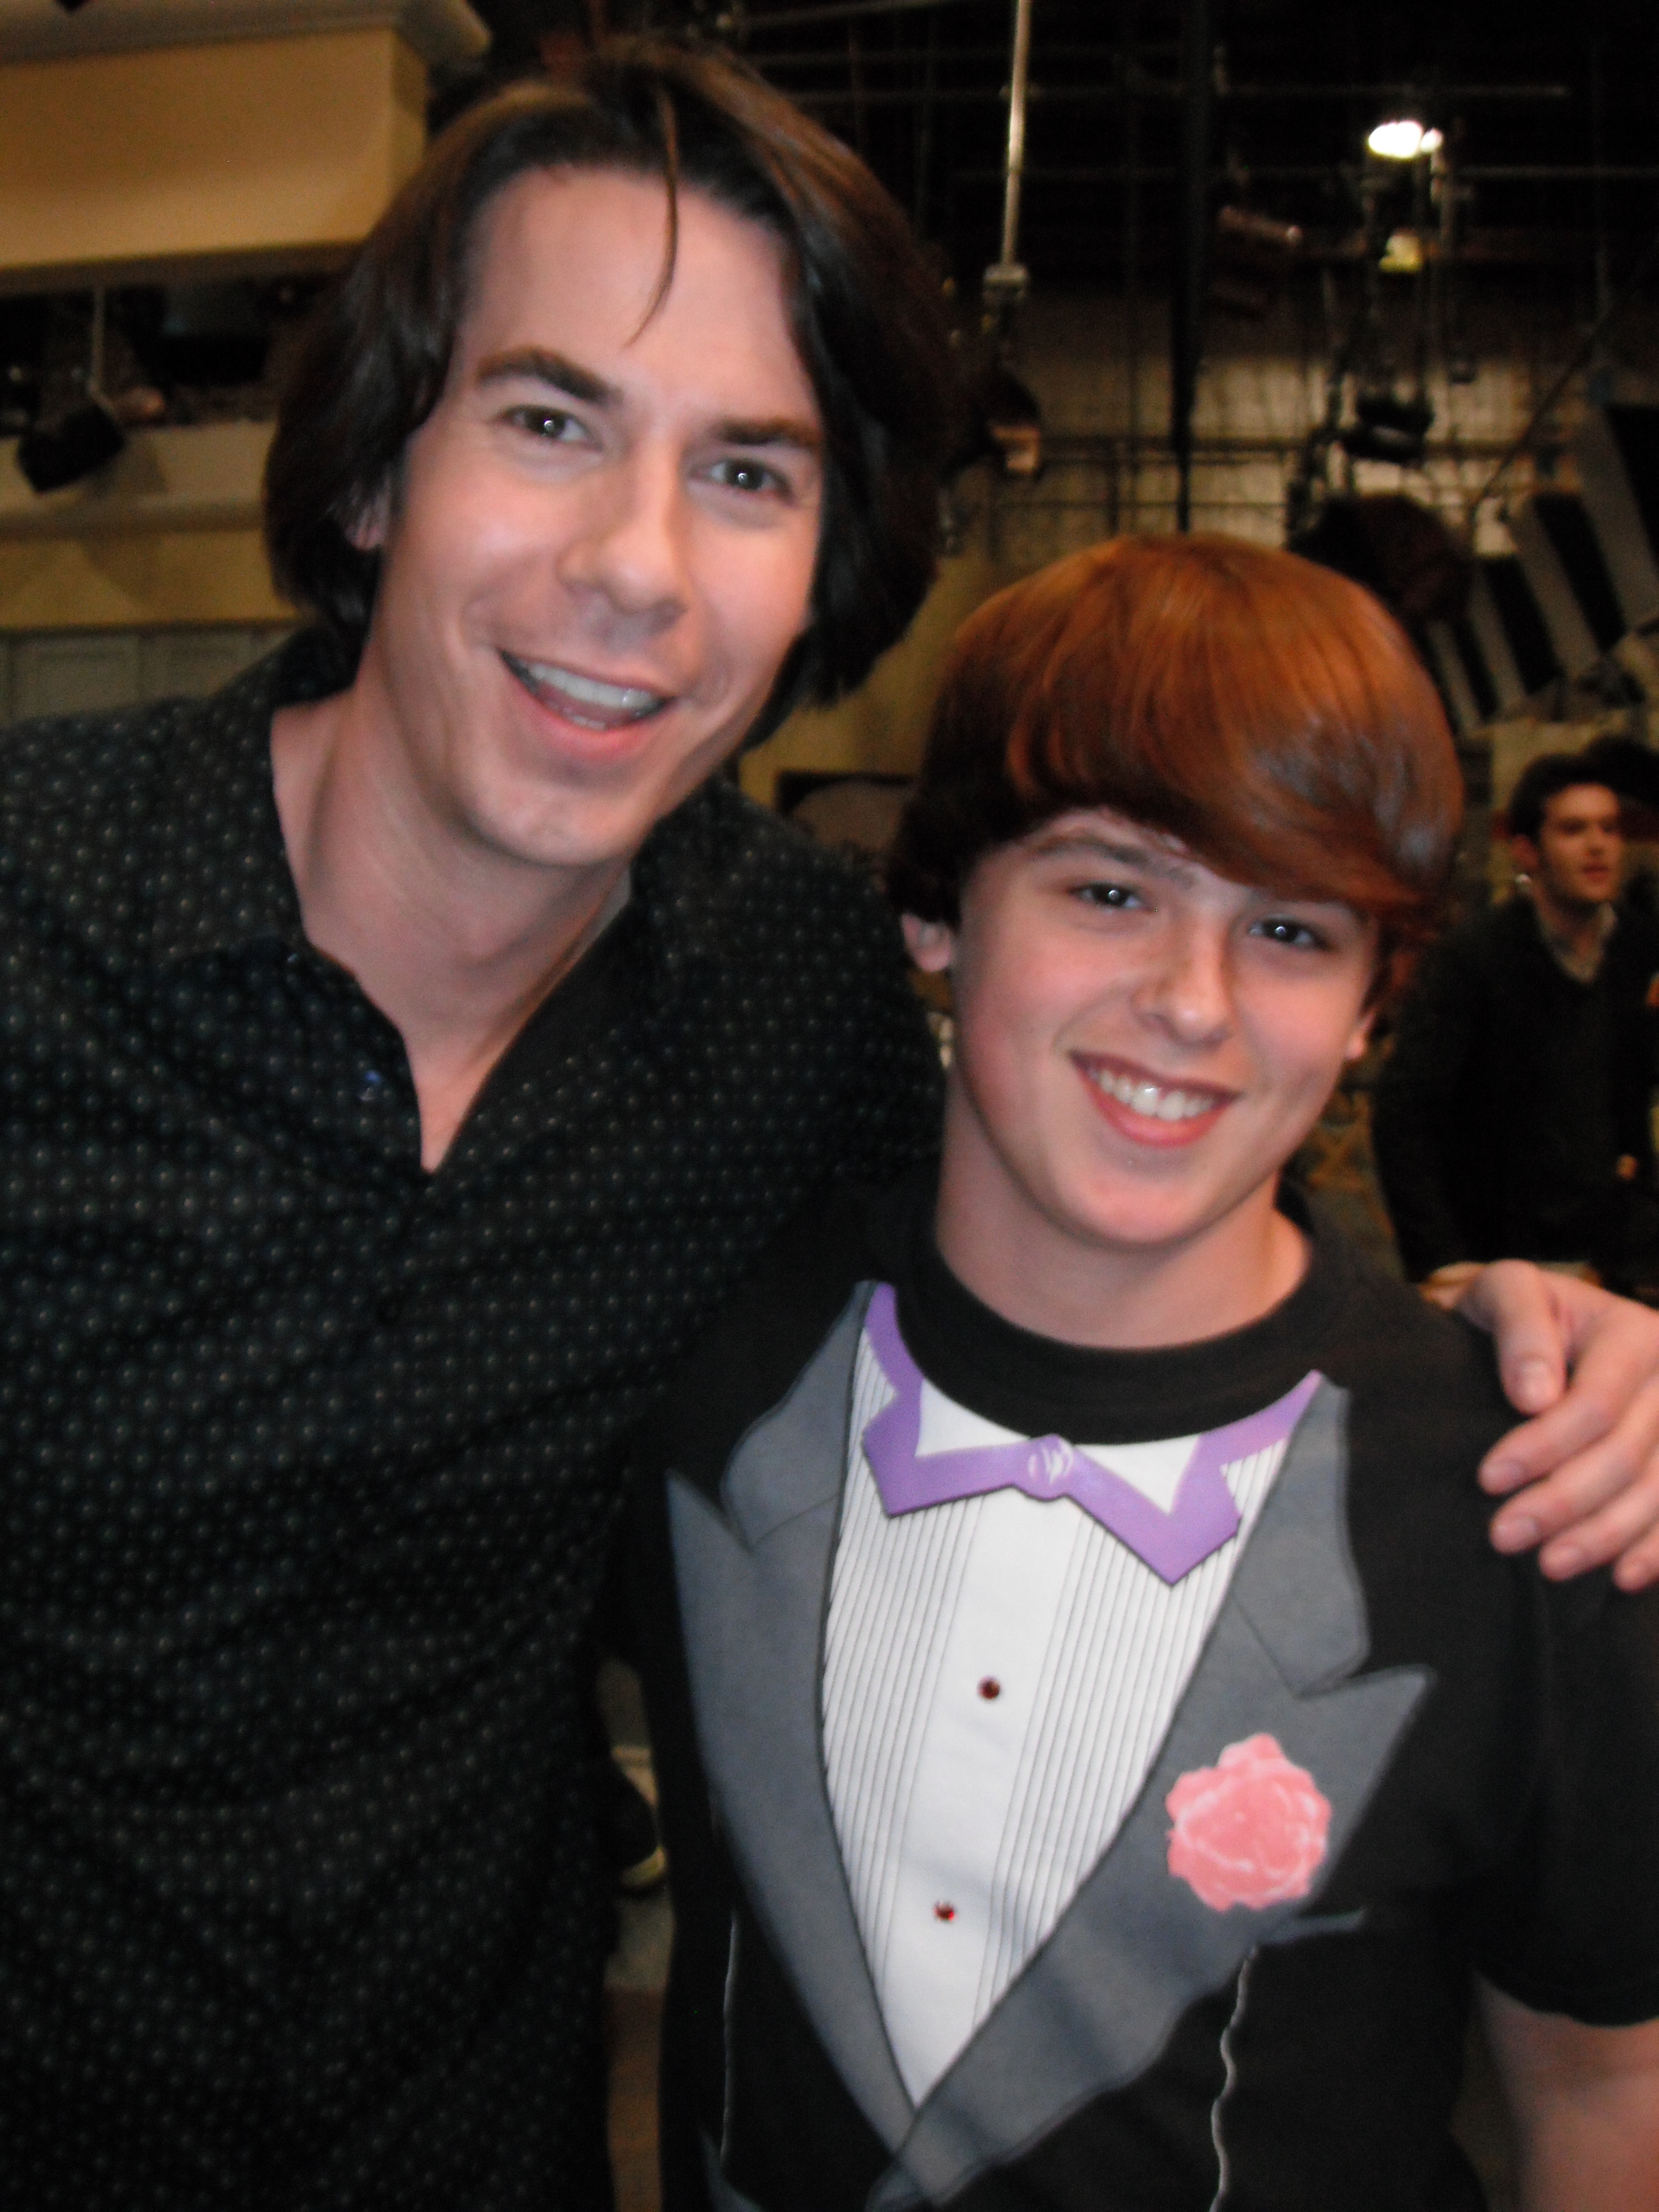 Hangin' with Jerry Trainor after shooting Episode 5 of Wendell & Vinnie